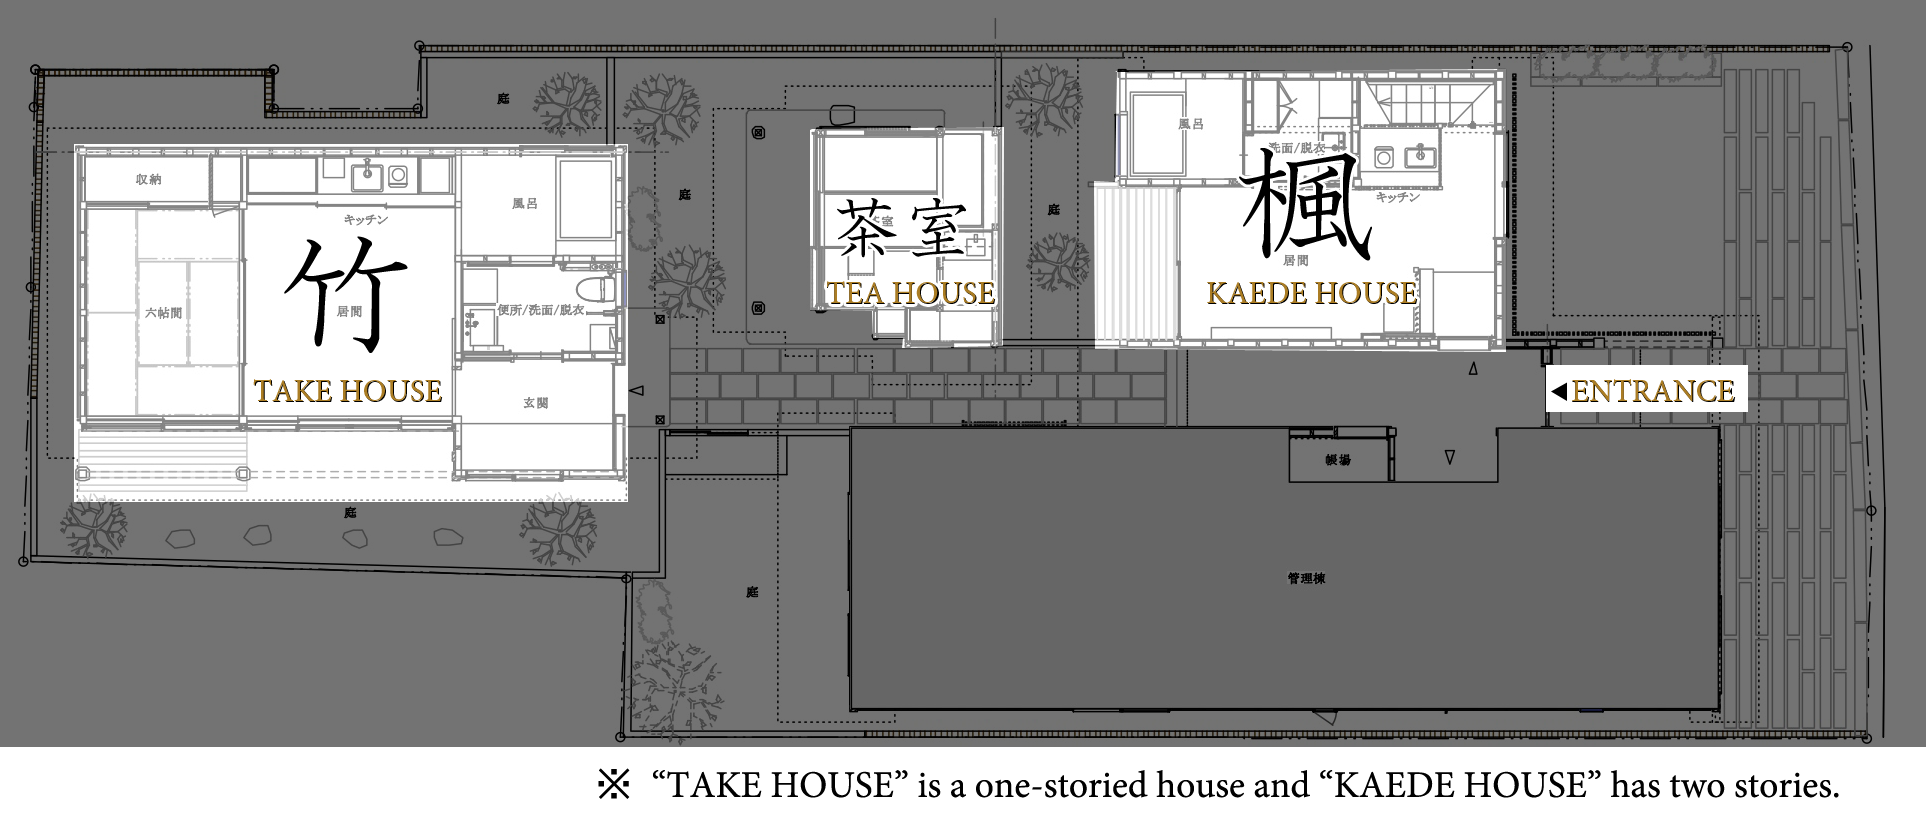 SANARI PLAN *"TAKE HOUSE" is a one storied house and "KAEDE HOUSE" has two stories.